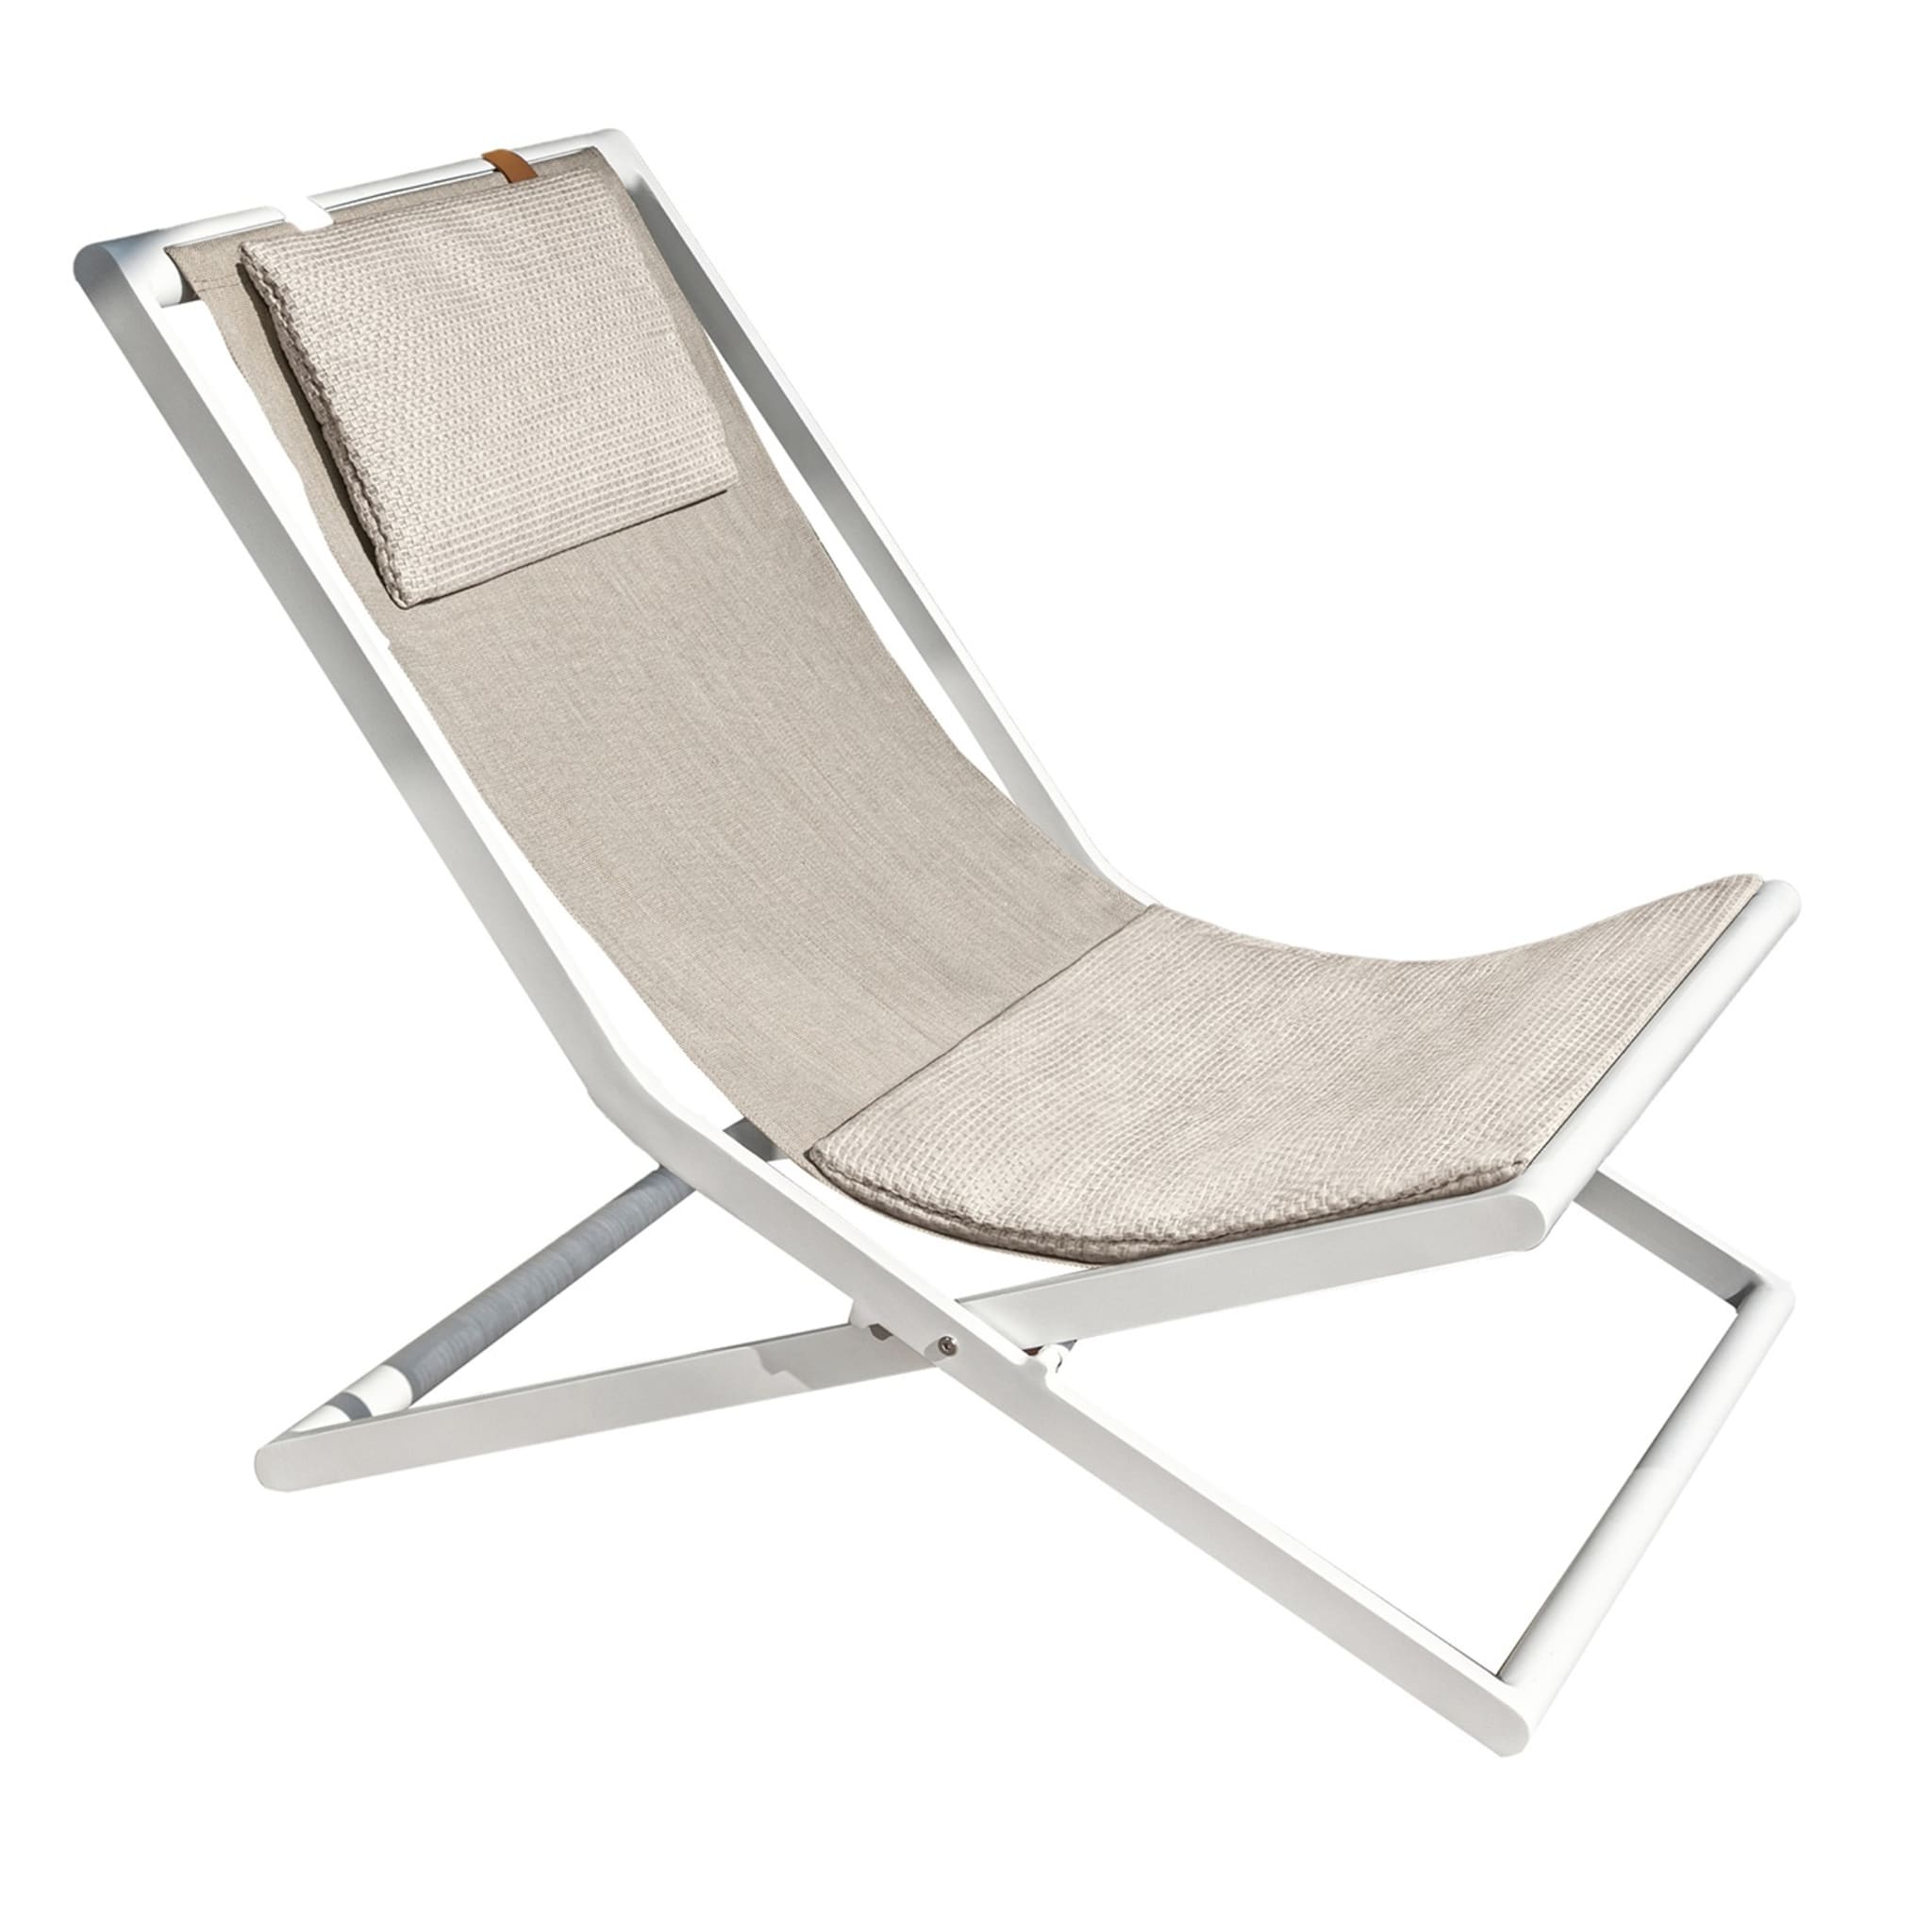 Riviera Deck Chair by Jean Philippe Nuel - Main view